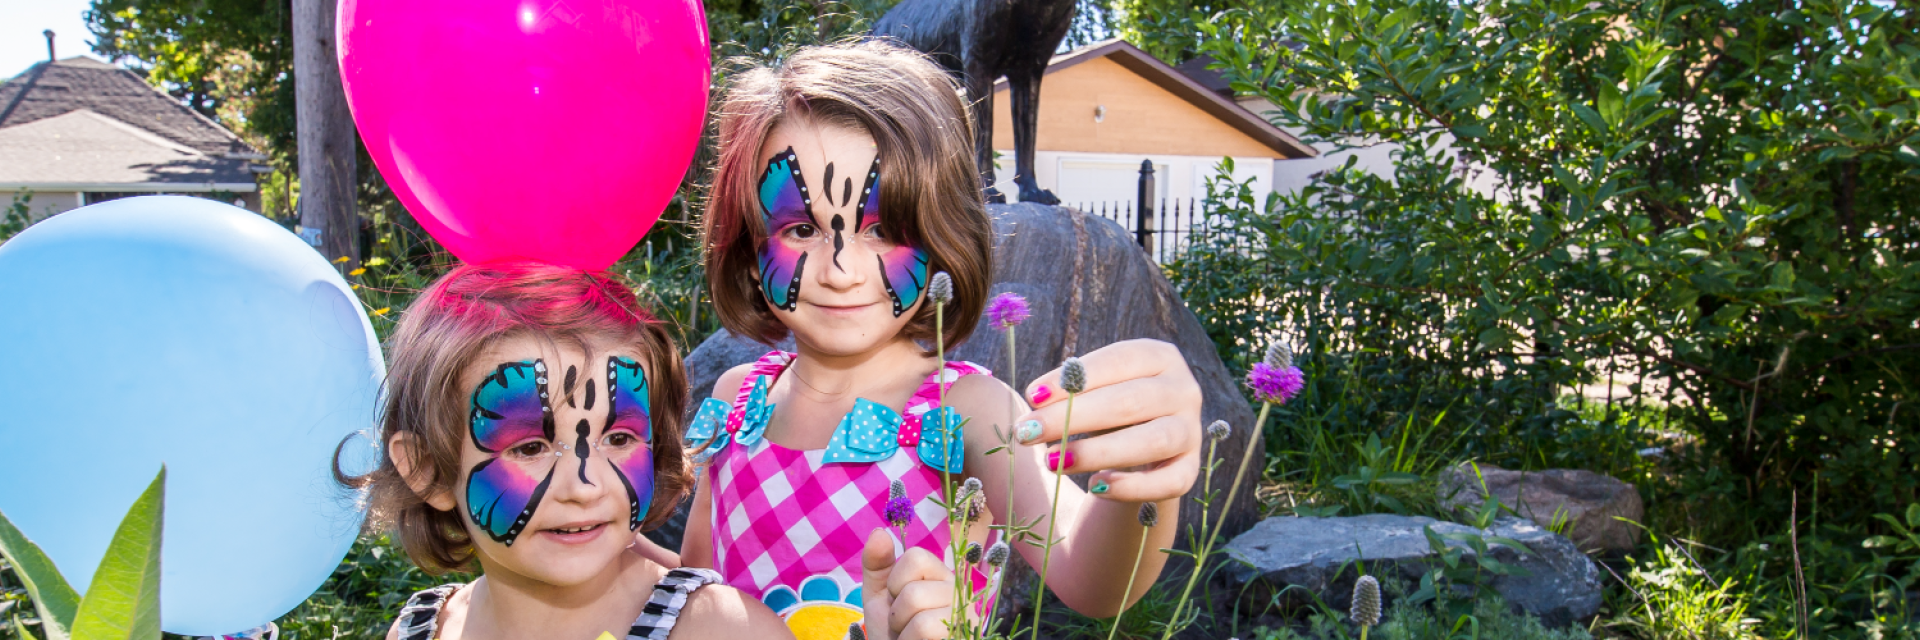 children with face paint and balloons 